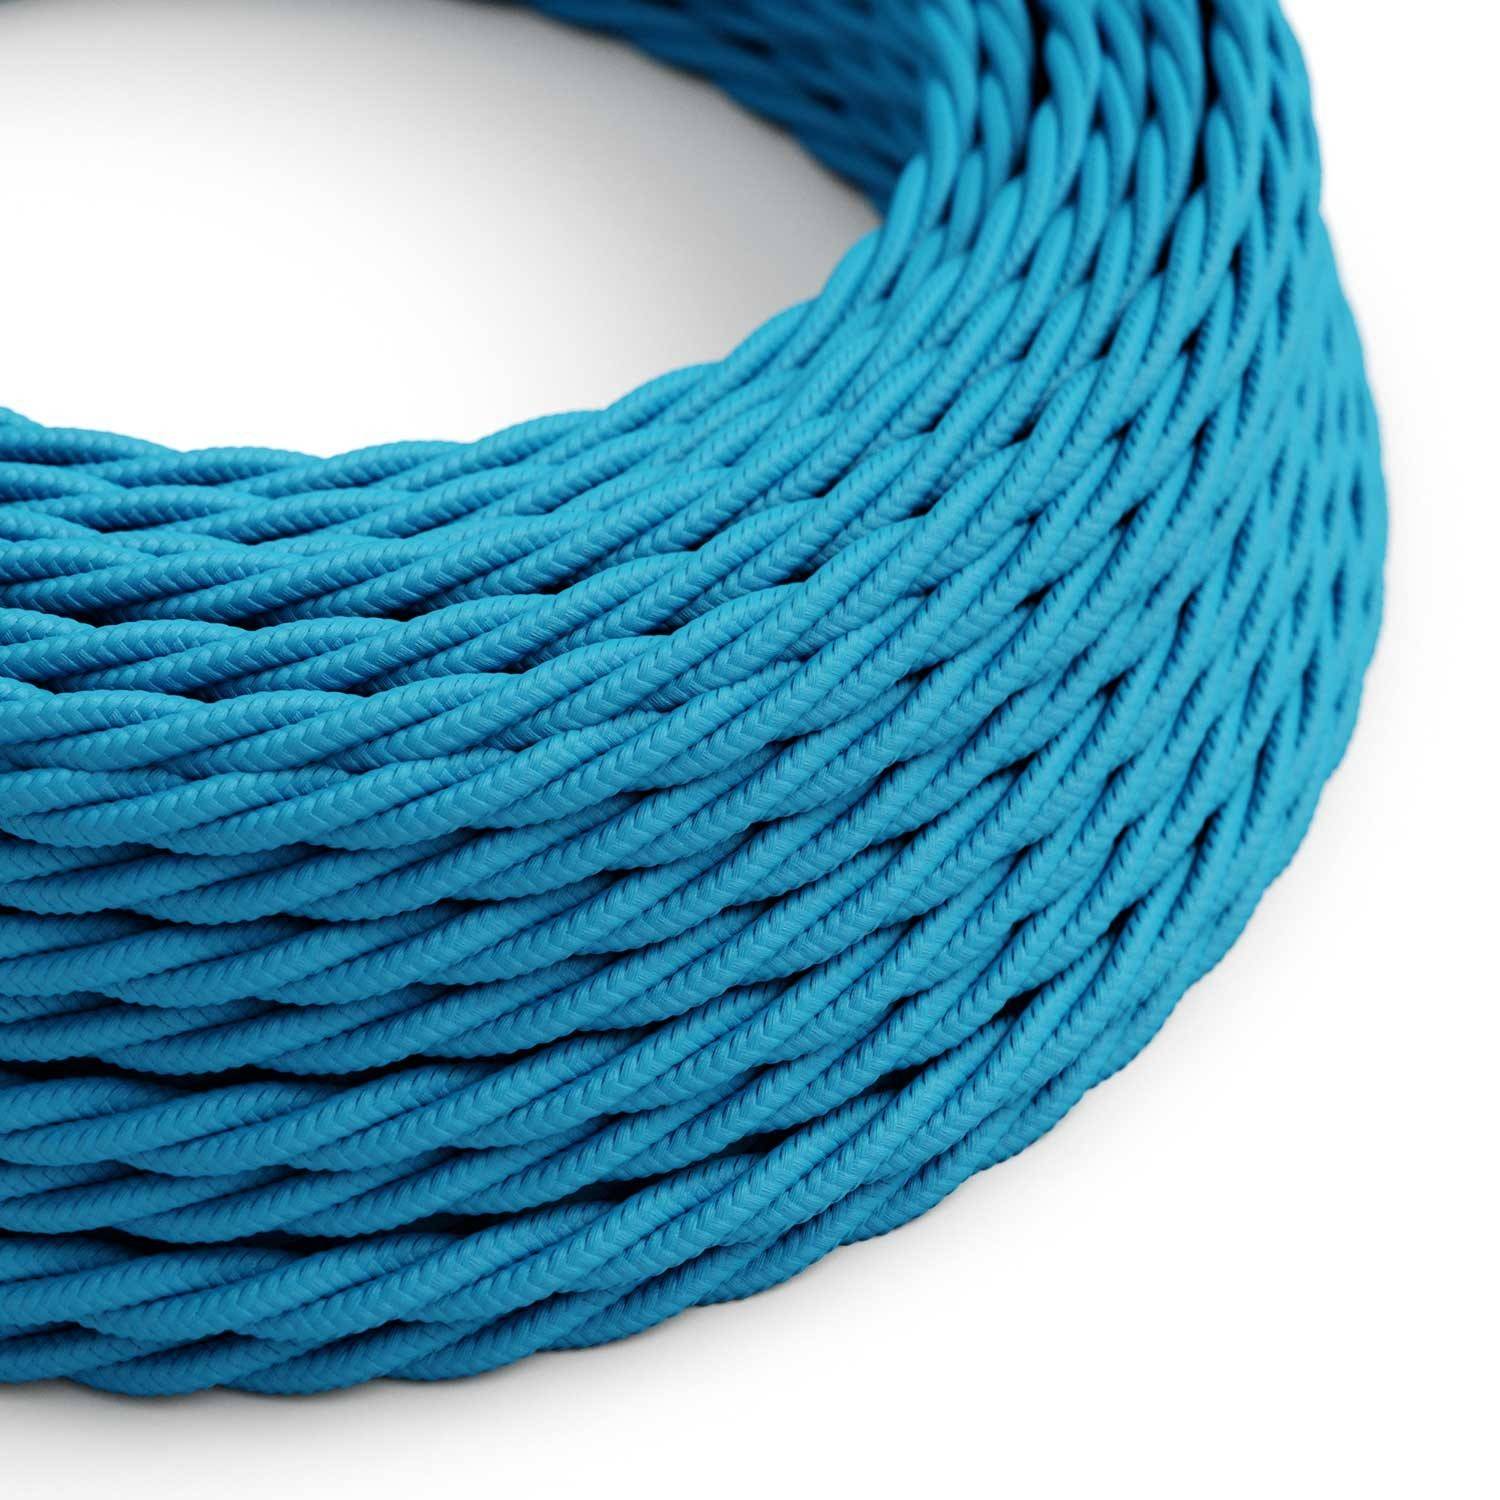 Glossy Blue Cyan Textile Cable - The Original Creative-Cables - TM11 braided 2x0.75mm / 3x0.75mm